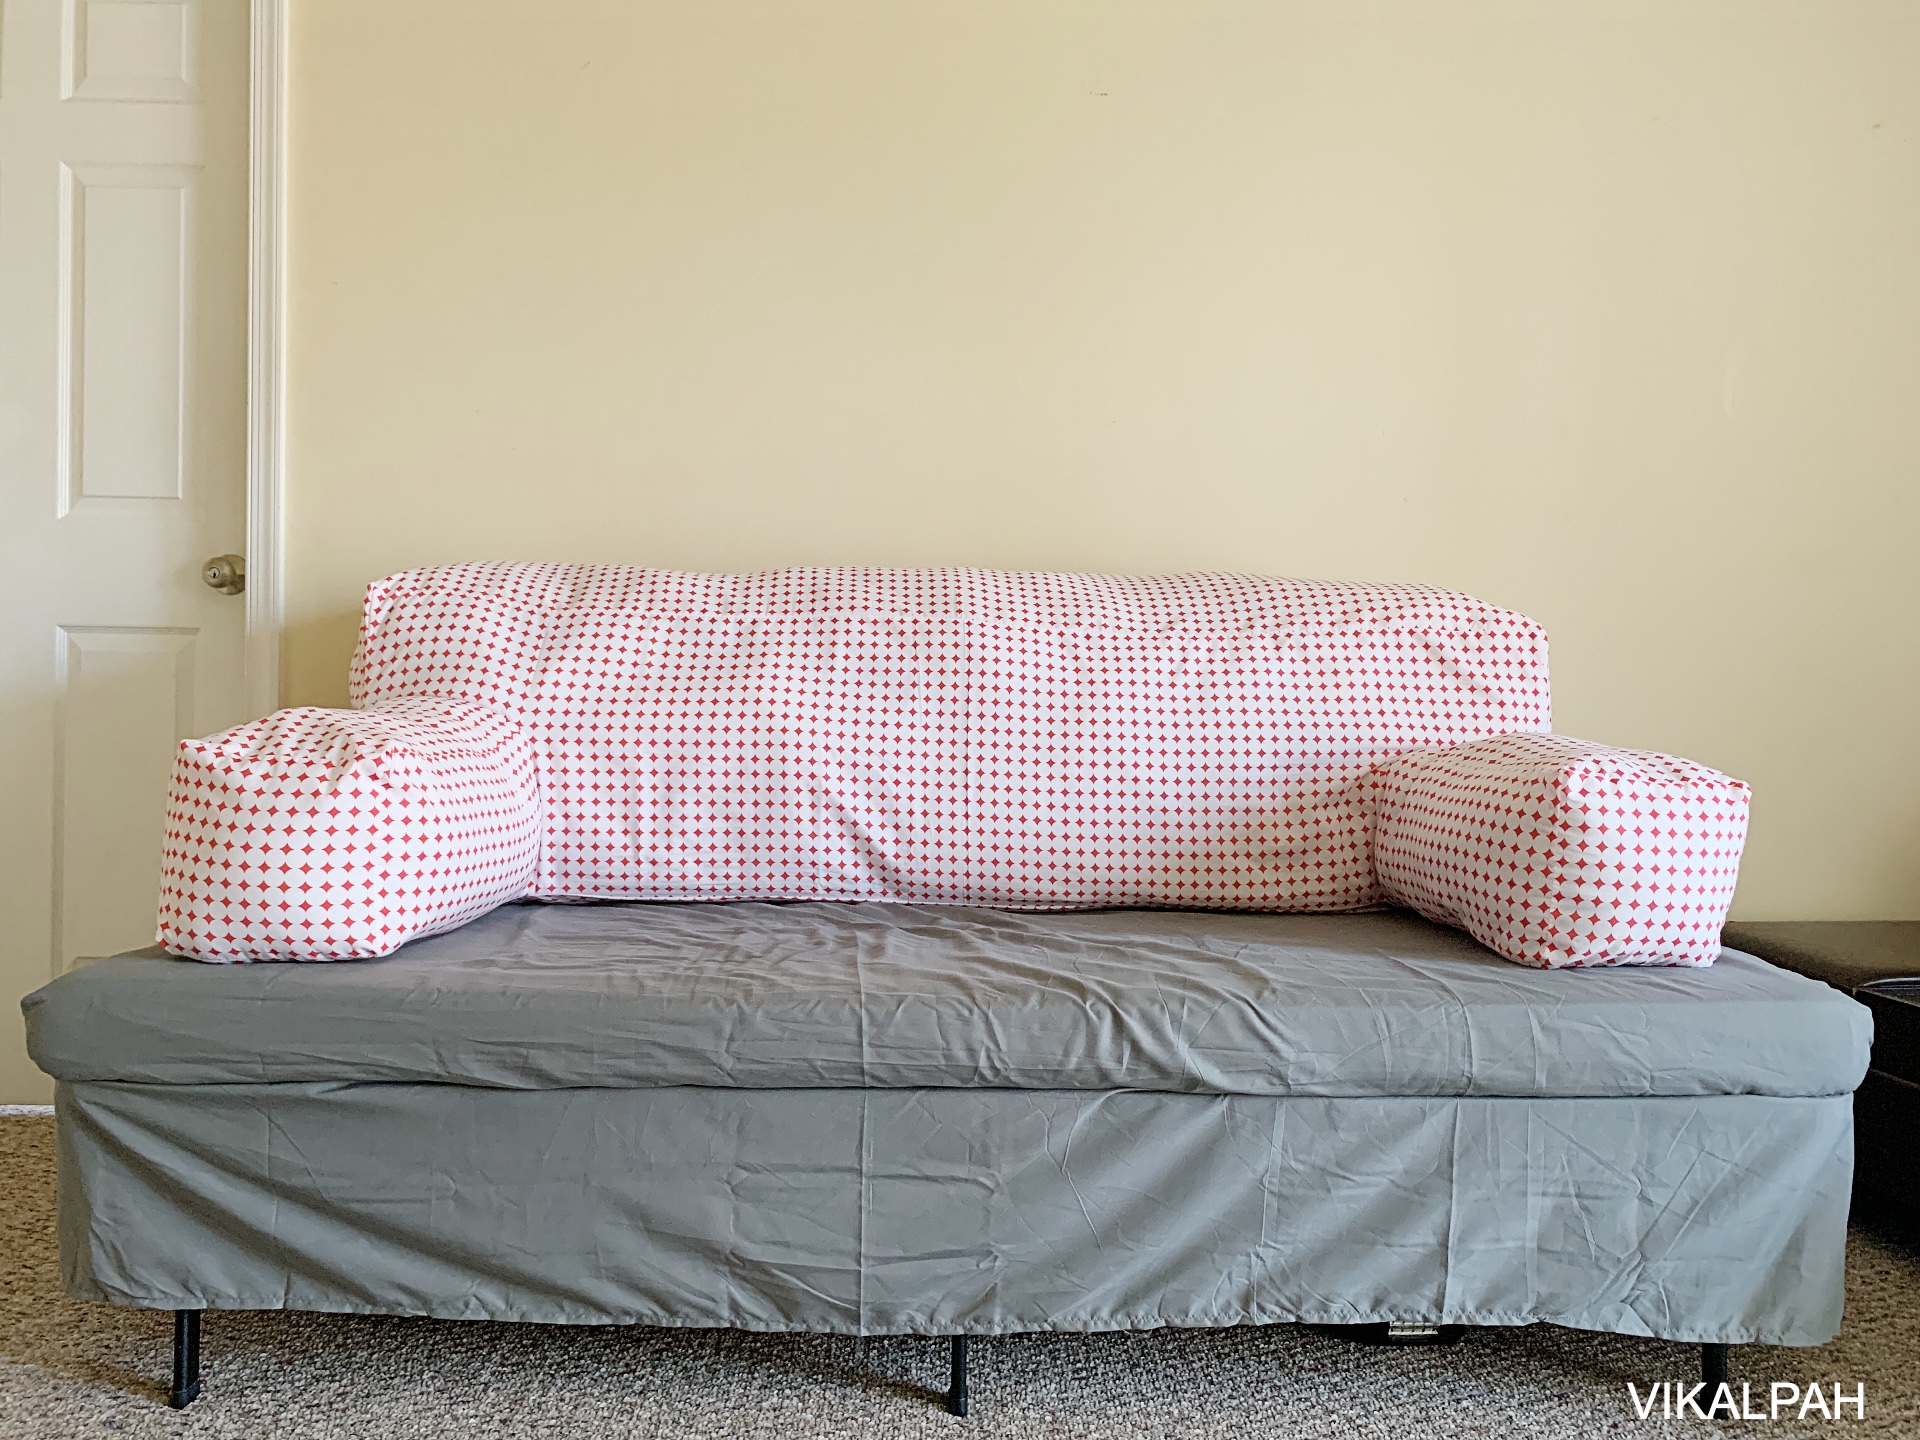 Twin Bed Into A Couch Diy Cover, How To Make A Twin Bed Look Like A Couch